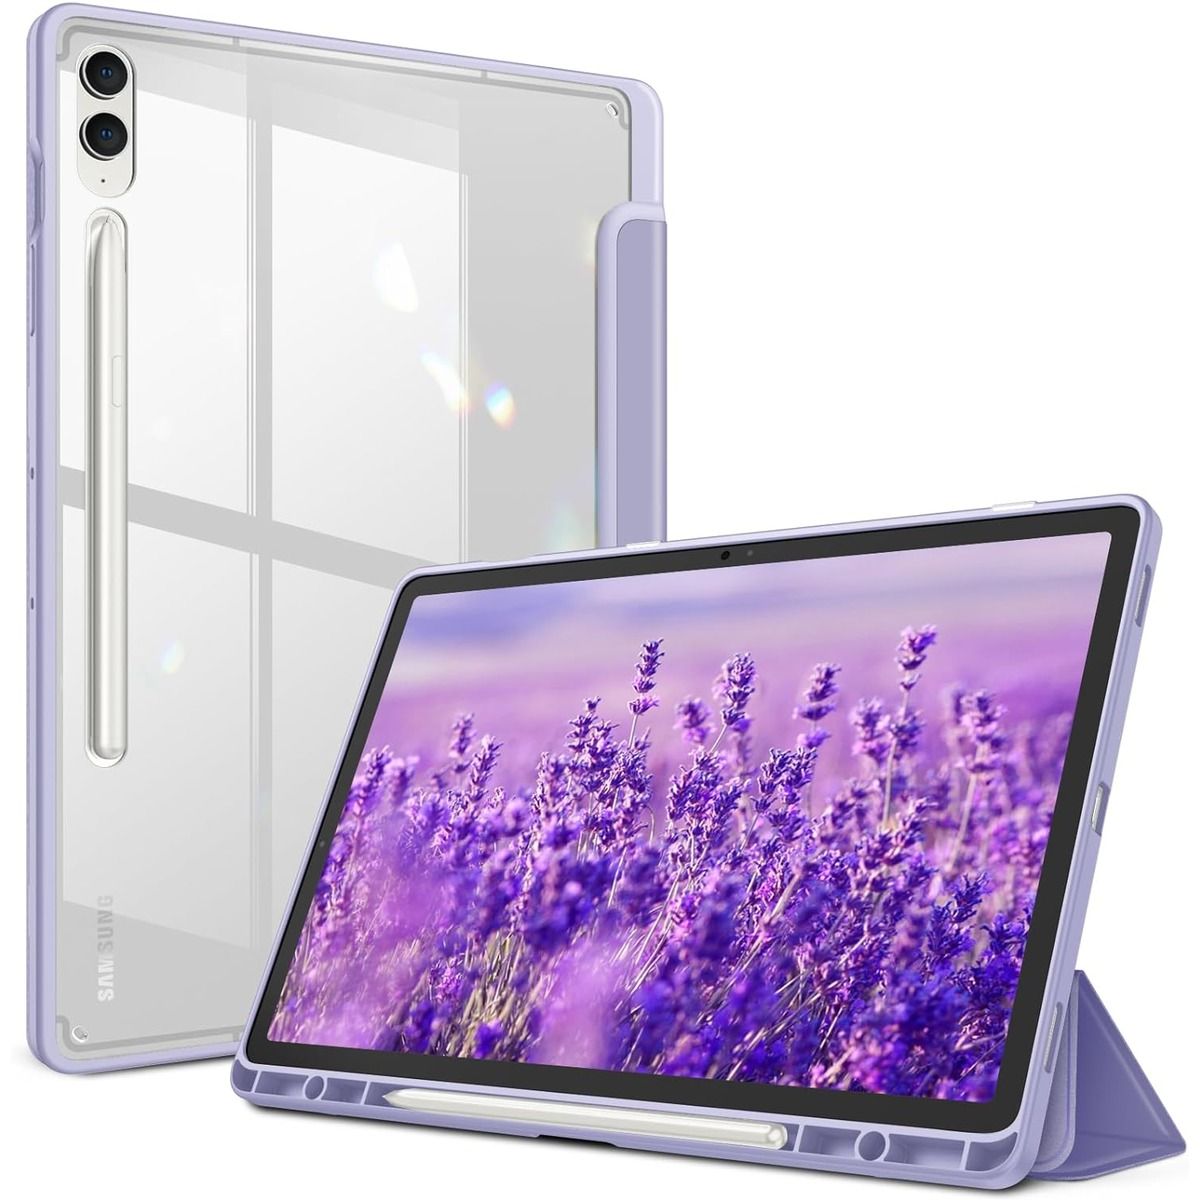 Fintie Hybrid Slim Case and Galaxy Tab S9 FE+ against a white background